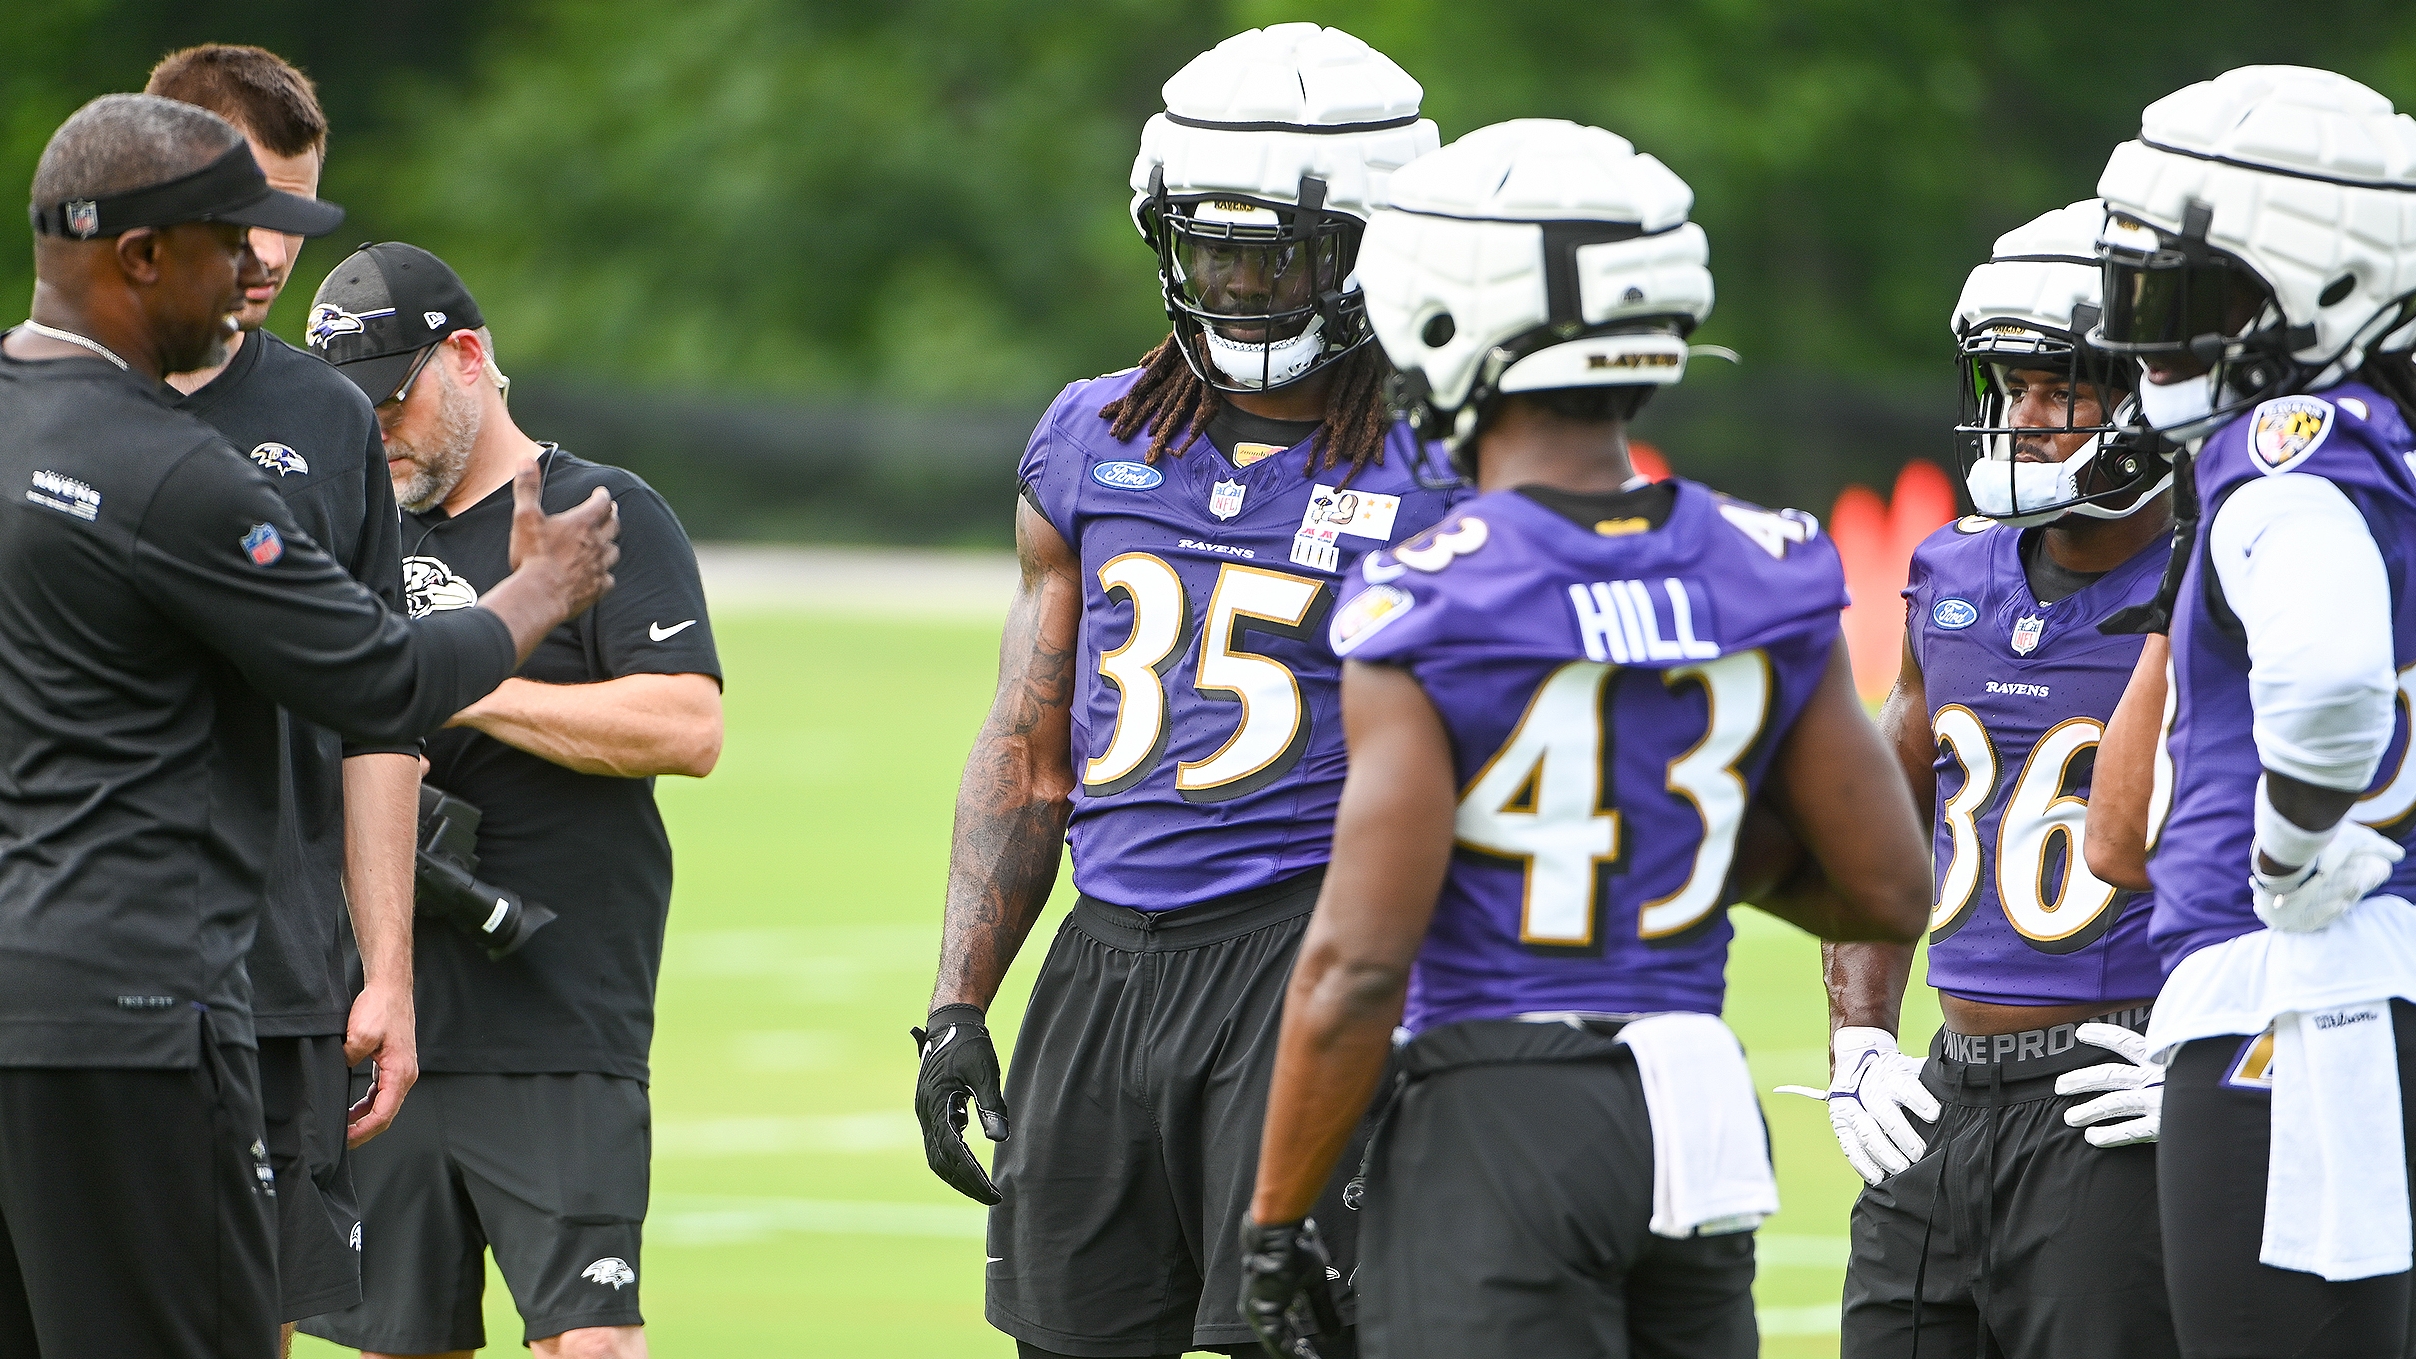 Ravens observations on a light first day of training camp, early